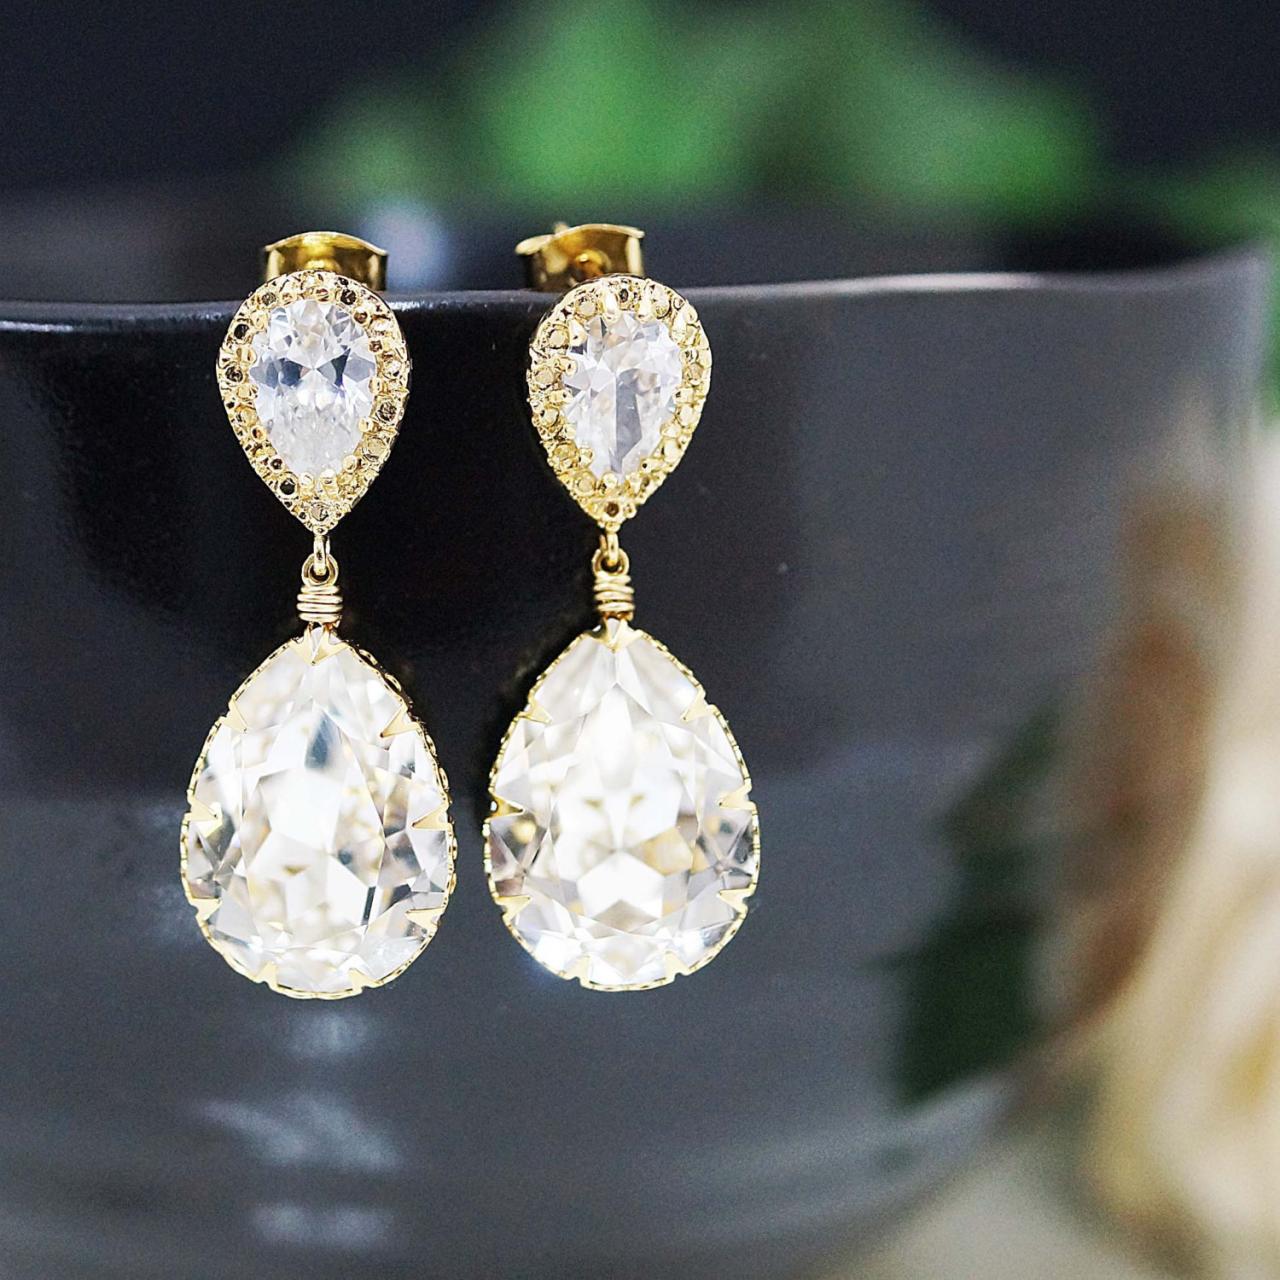 Bridal Earrings Bridesmaid Earrings Gold Plated Cubic Zirconia Earrings With Clear White Swarovski Crystal Tear Drops